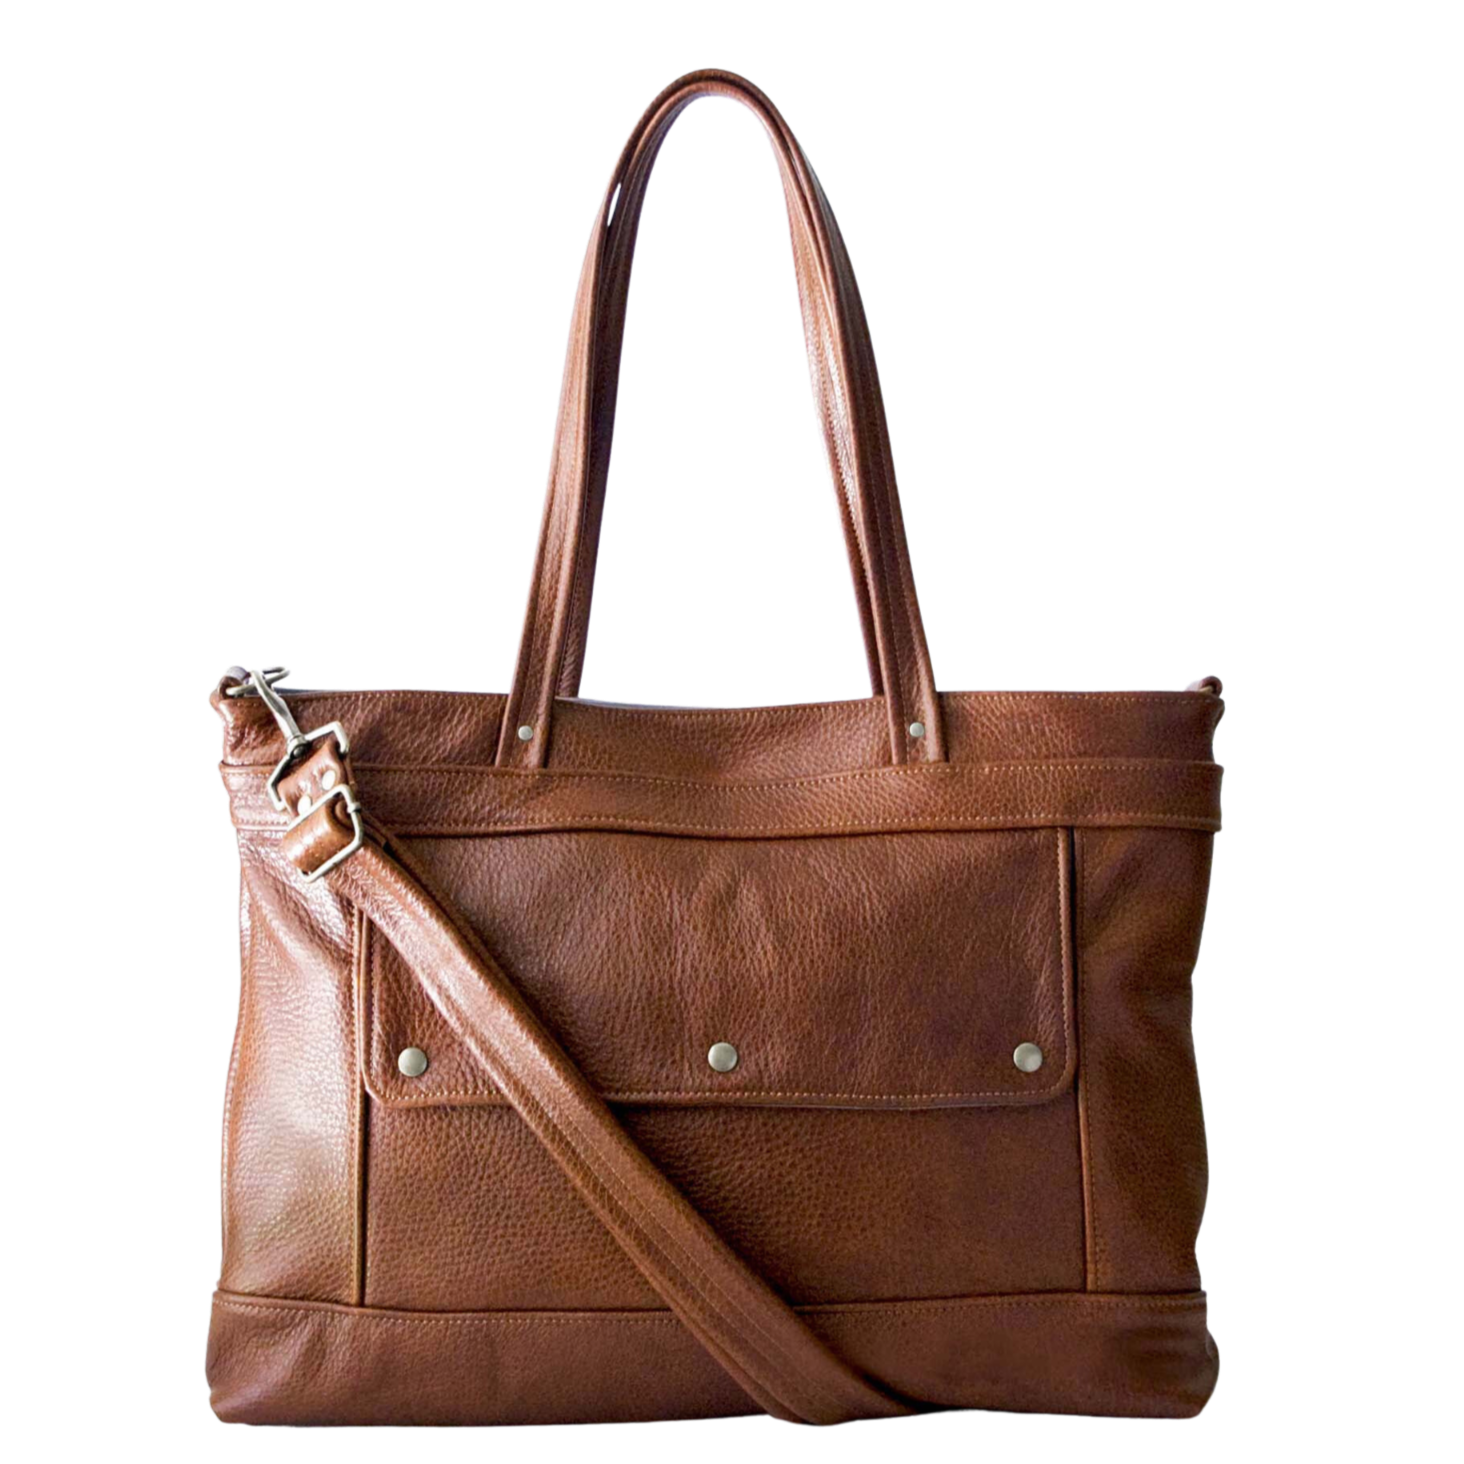 Leather Laptop Tote Bag in Chestnut brown leather, nickel hardware, tote handles, fully adjustable and removable crossbody strap